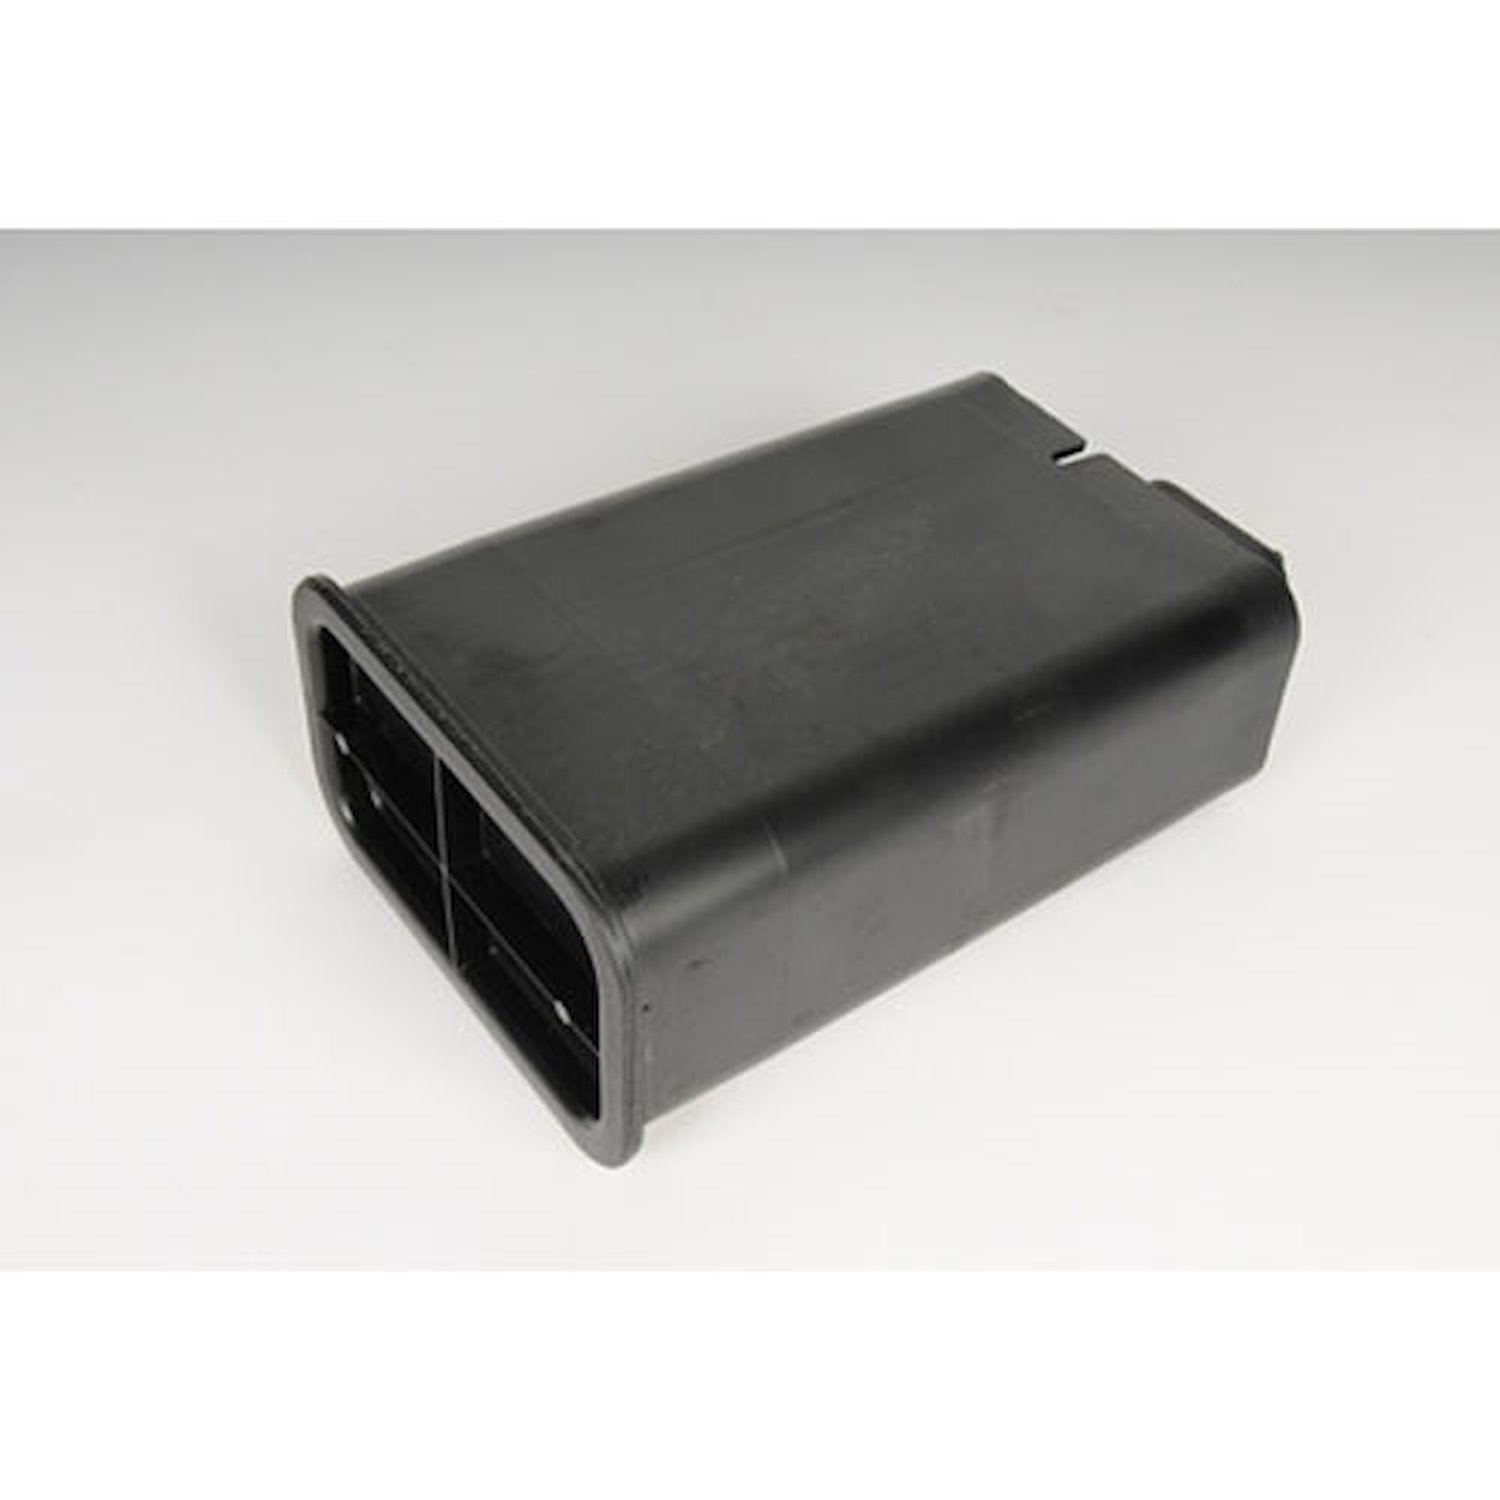 Vapor Canister for Select 1998-2013 Buick, Cadillac, Chevrolet, Oldsmobile, Pontiac